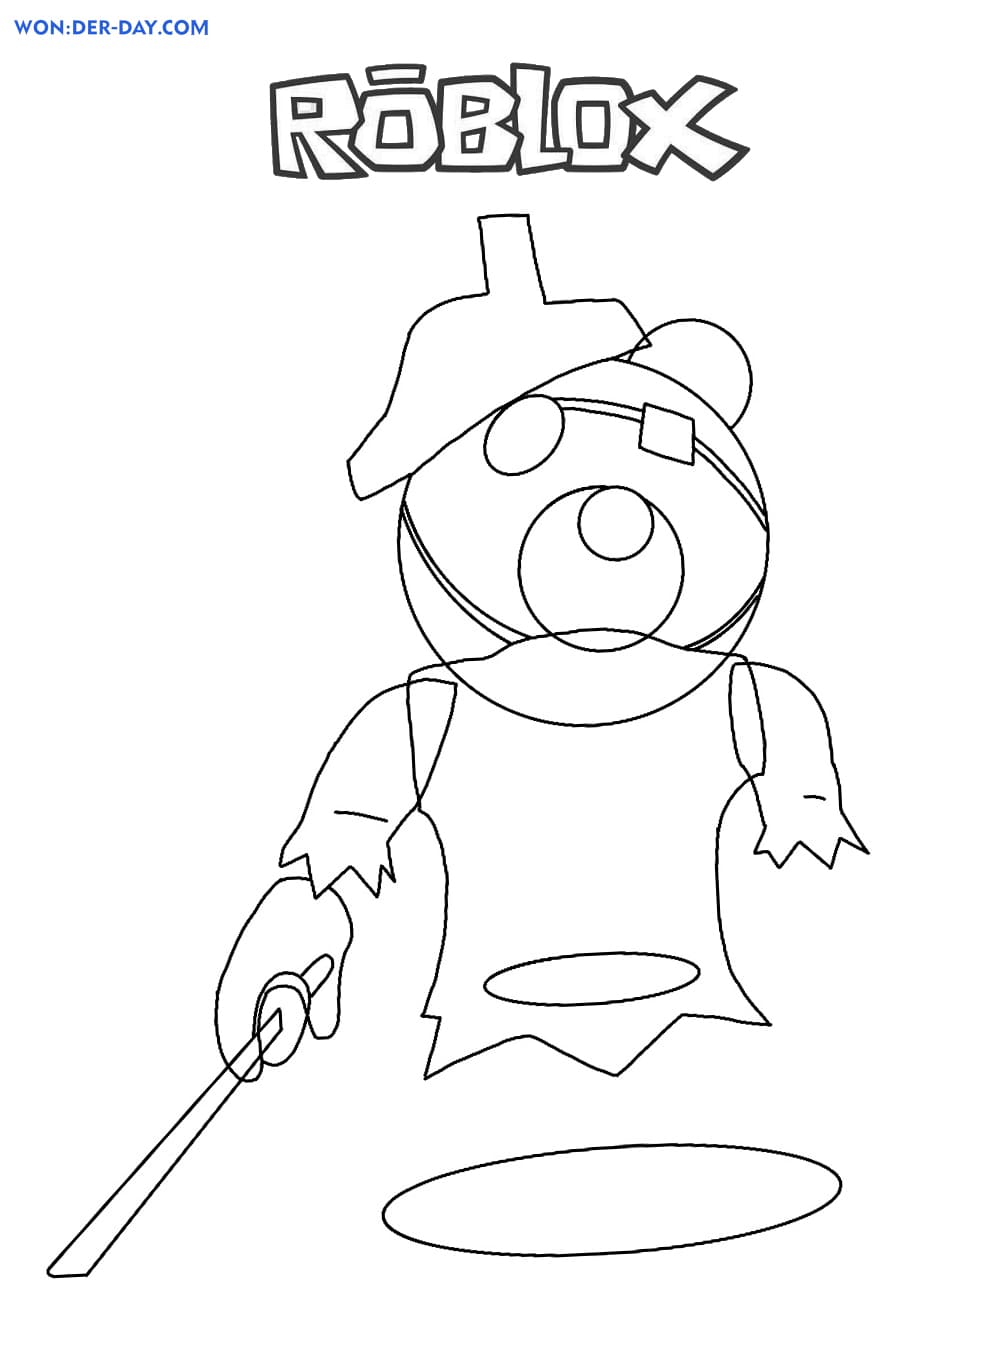 Piggy Roblox Coloring Pages Wonder Day Coloring Pages For Children And Adults - mr p roblox piggy coloring pages